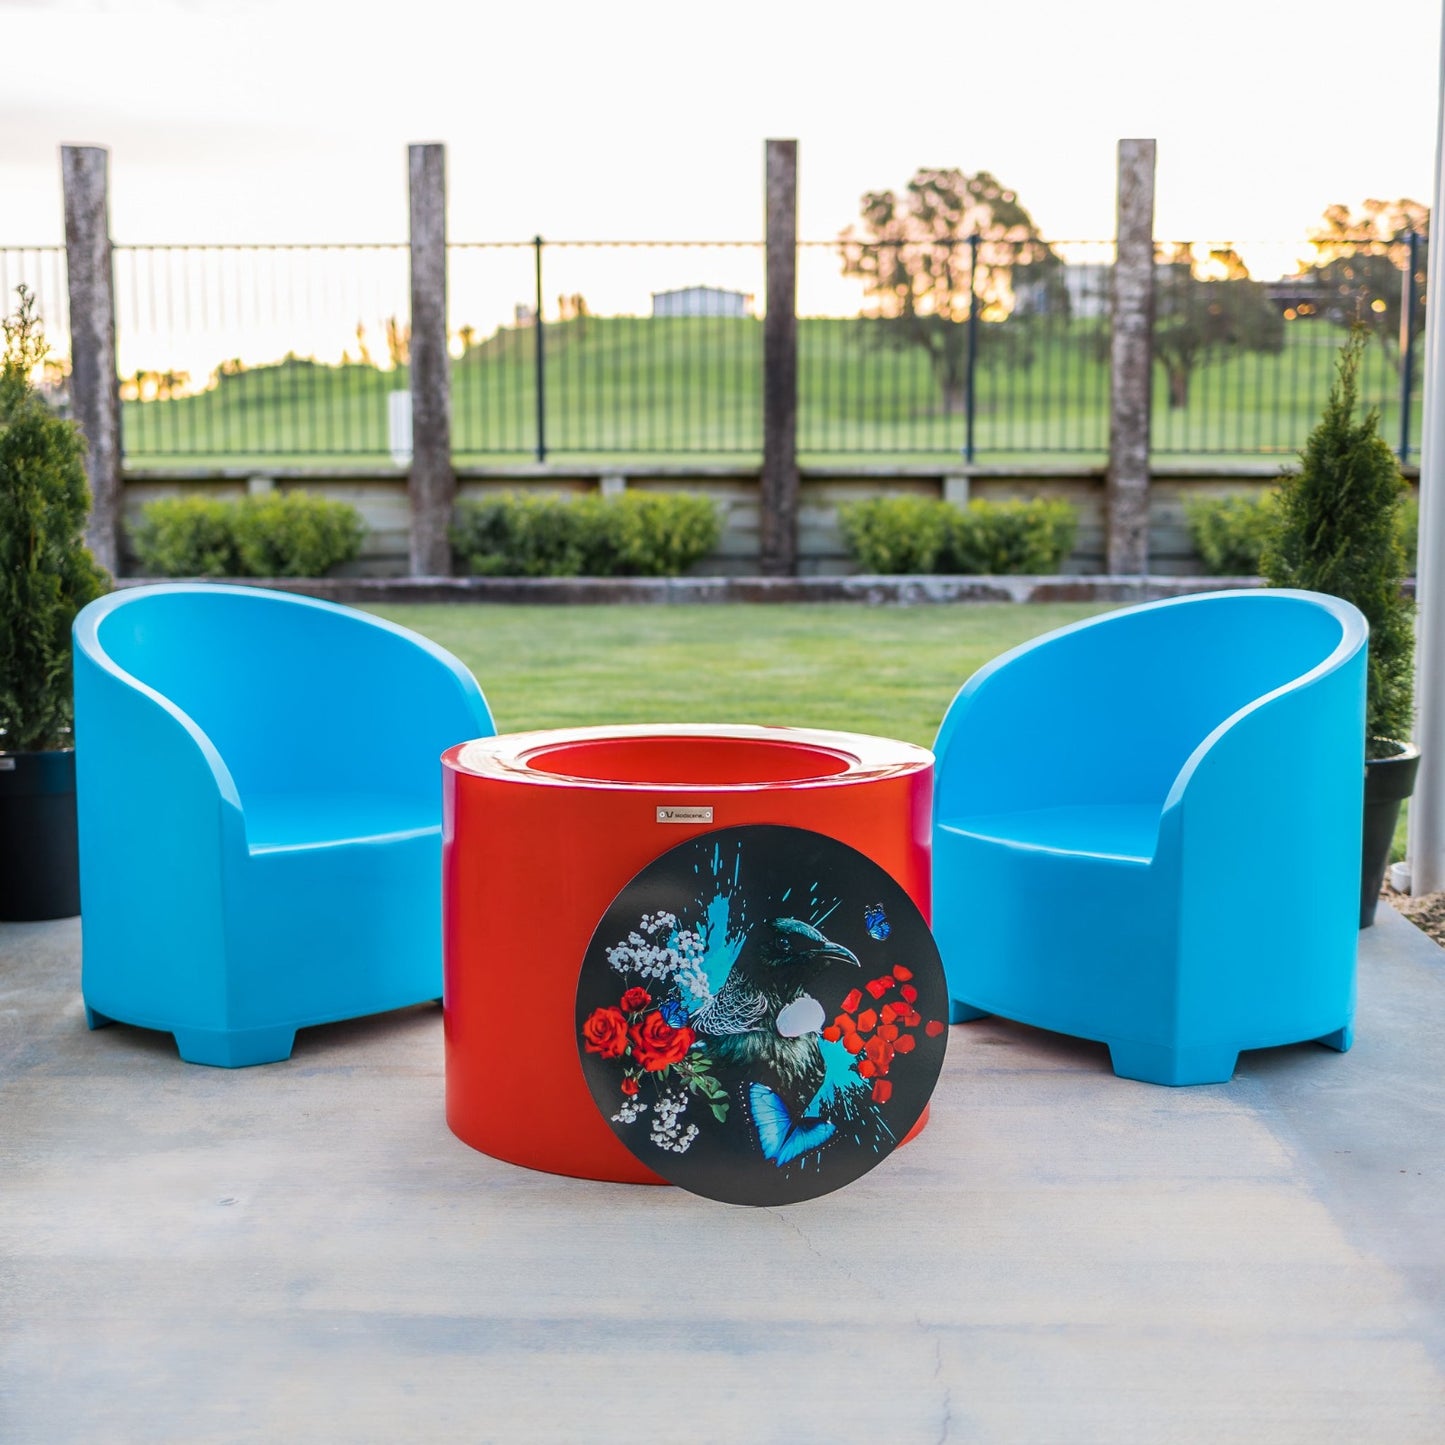 Two blue outdoor chairs and a red cylinder table with a Tui tabletop.